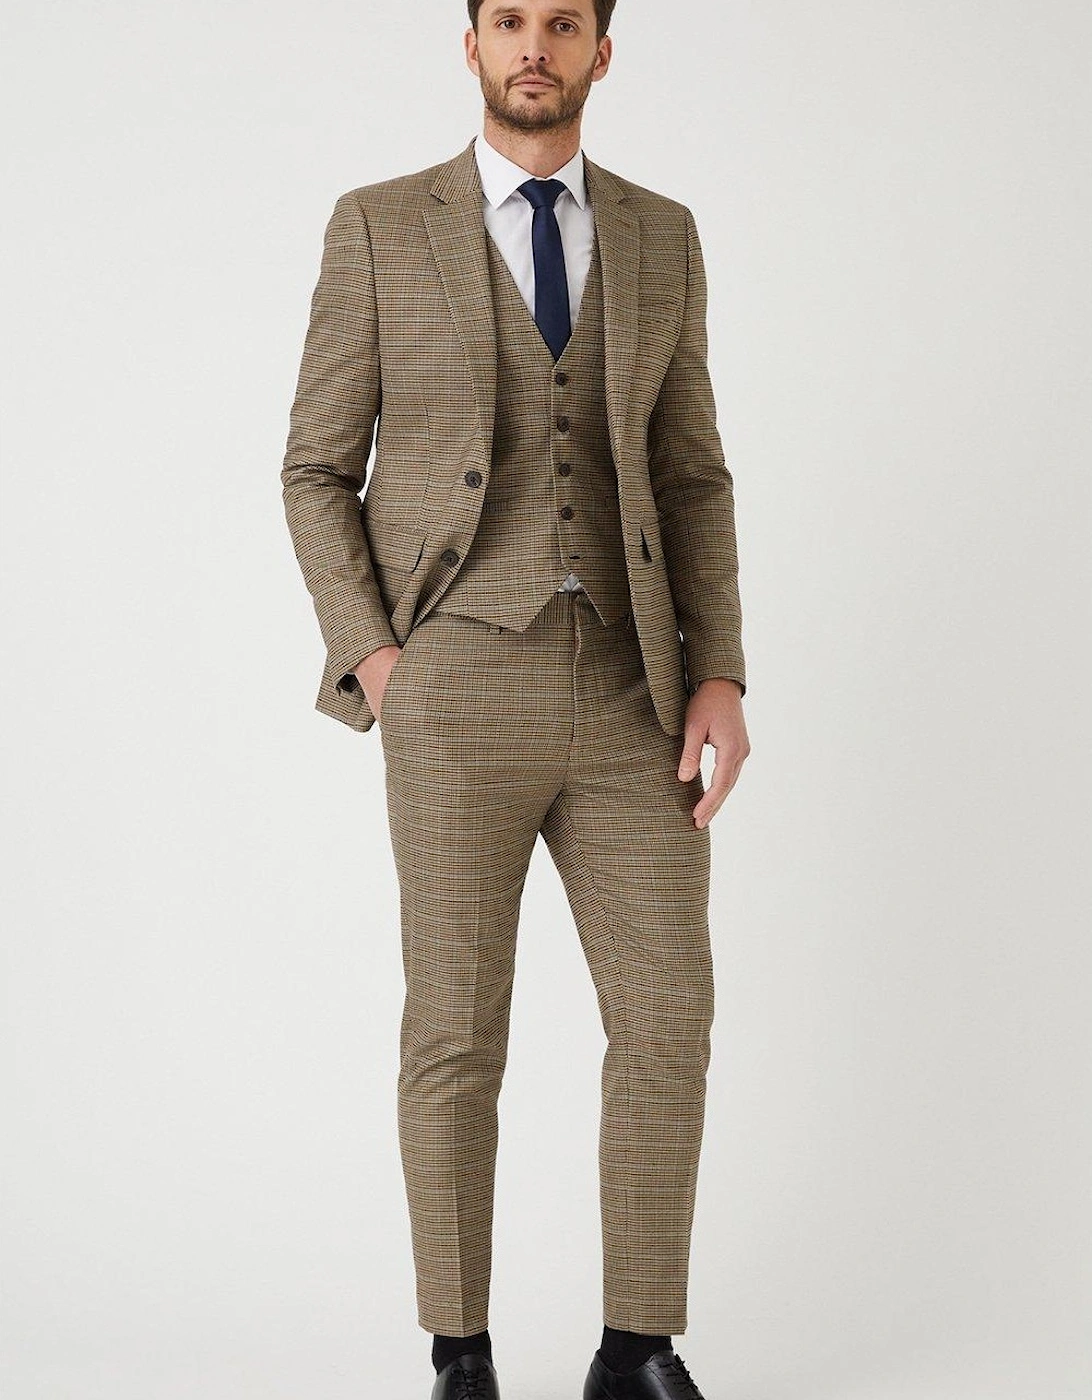 Mens Puppytooth Skinny Suit Jacket